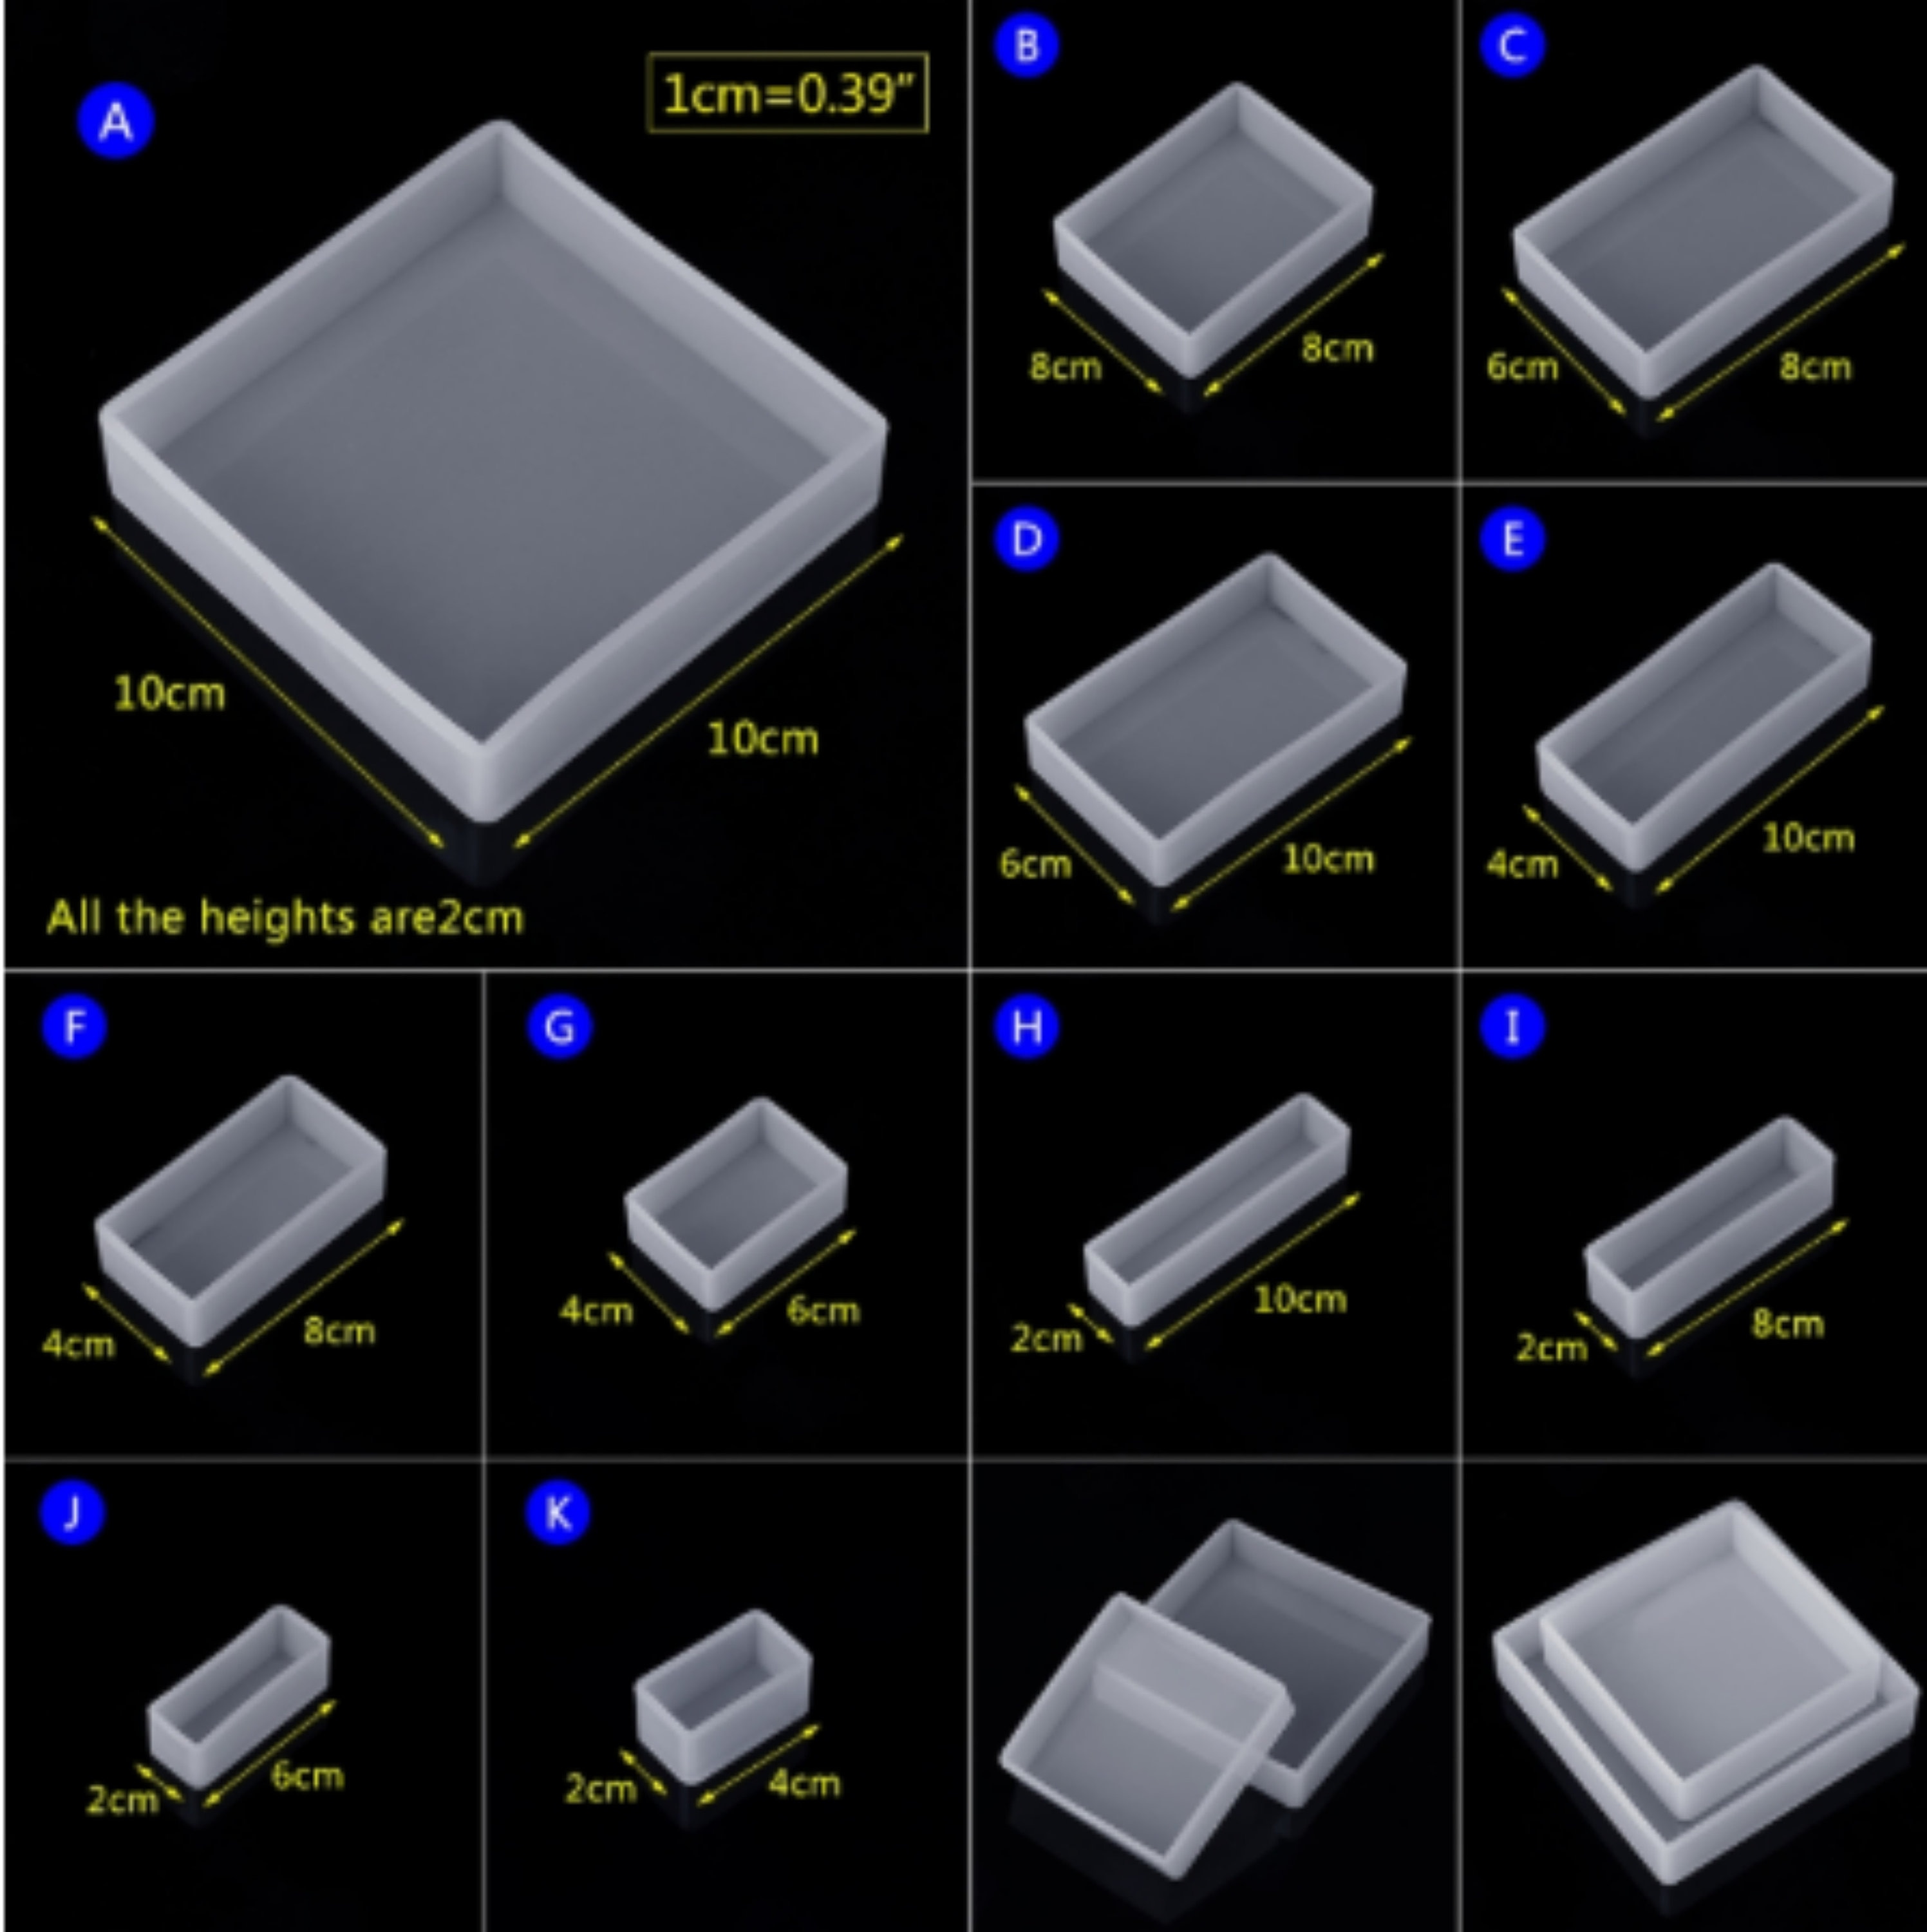 4x4x1 Thick 4 Coaster Silicone Mold - Square – Crafted Elements